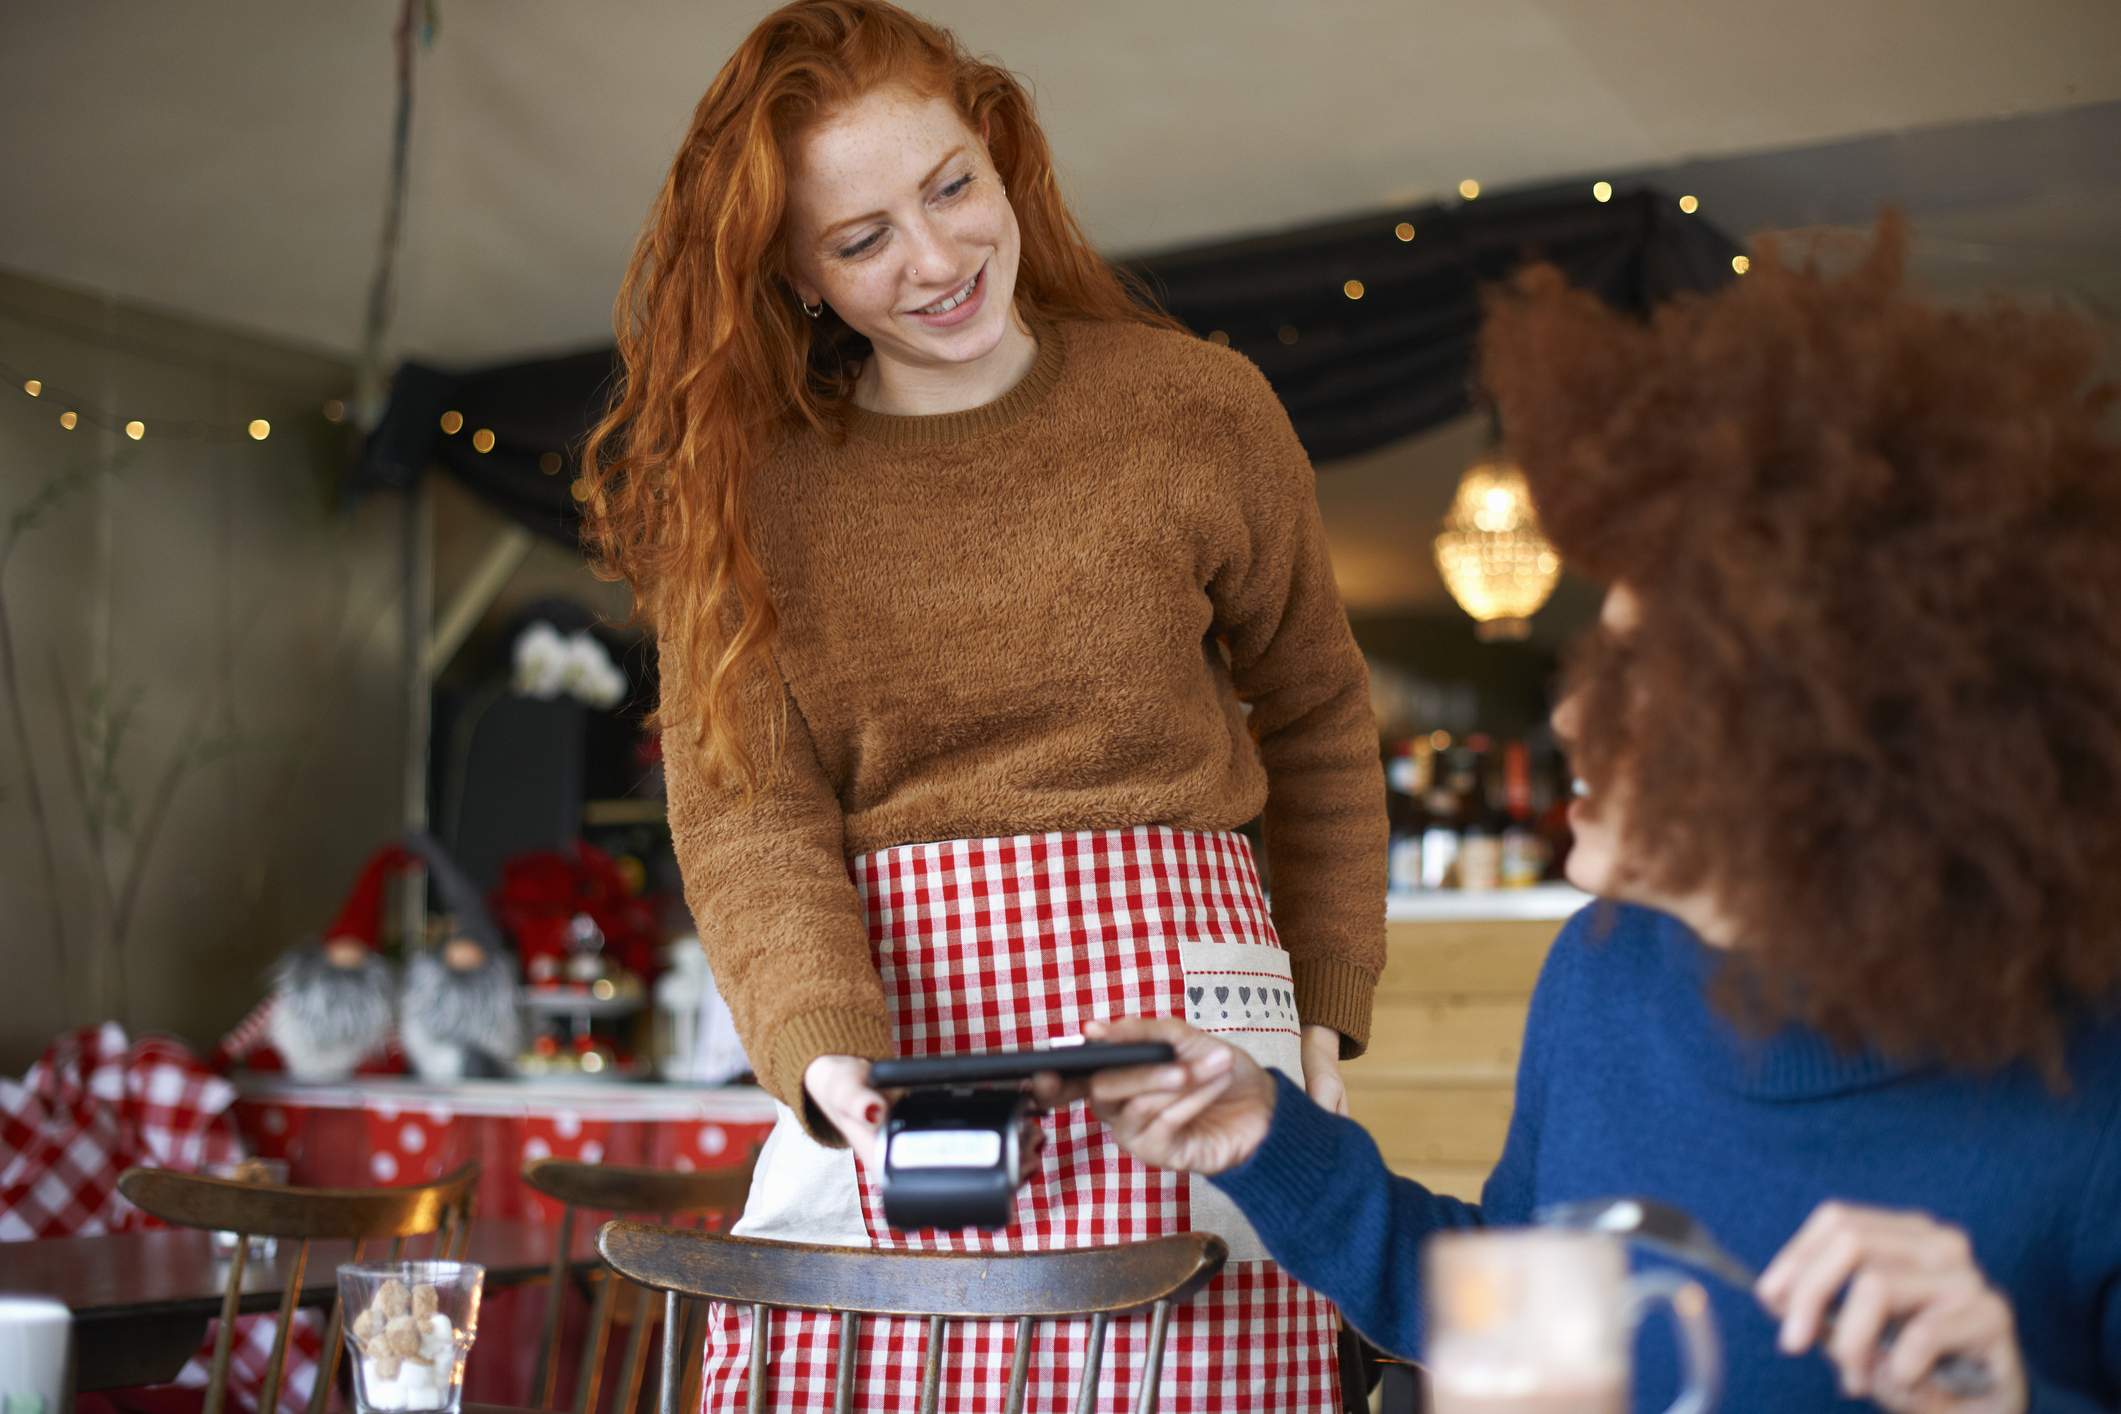 Image depicts a server wearing an orange sweater and a red plaid apron holding out a point-of-sale (POS) system to a guest. The diner is wearing a blue sweater and is tapping their phone to the device to pay for the meal. 